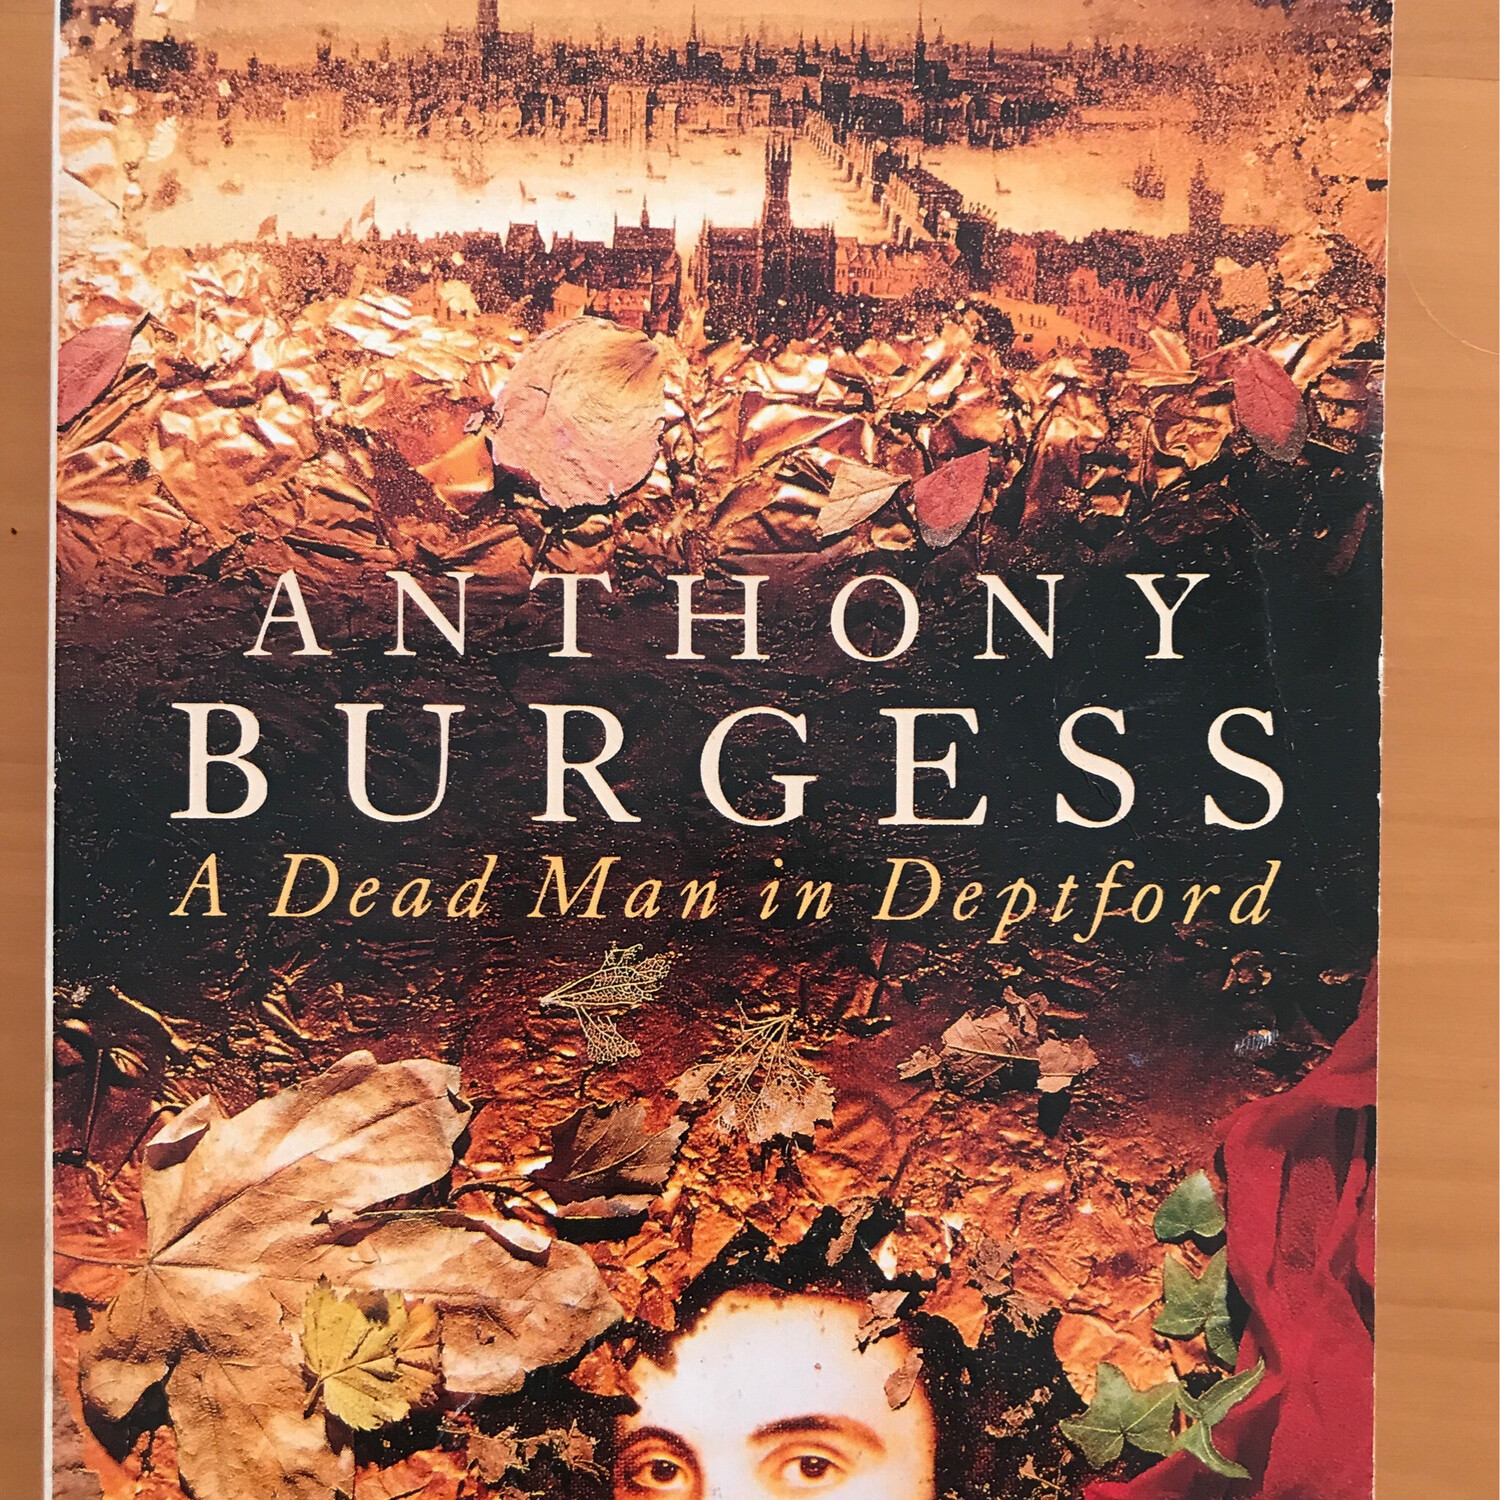 A Dead Man In Deptford, Anthony Burgess